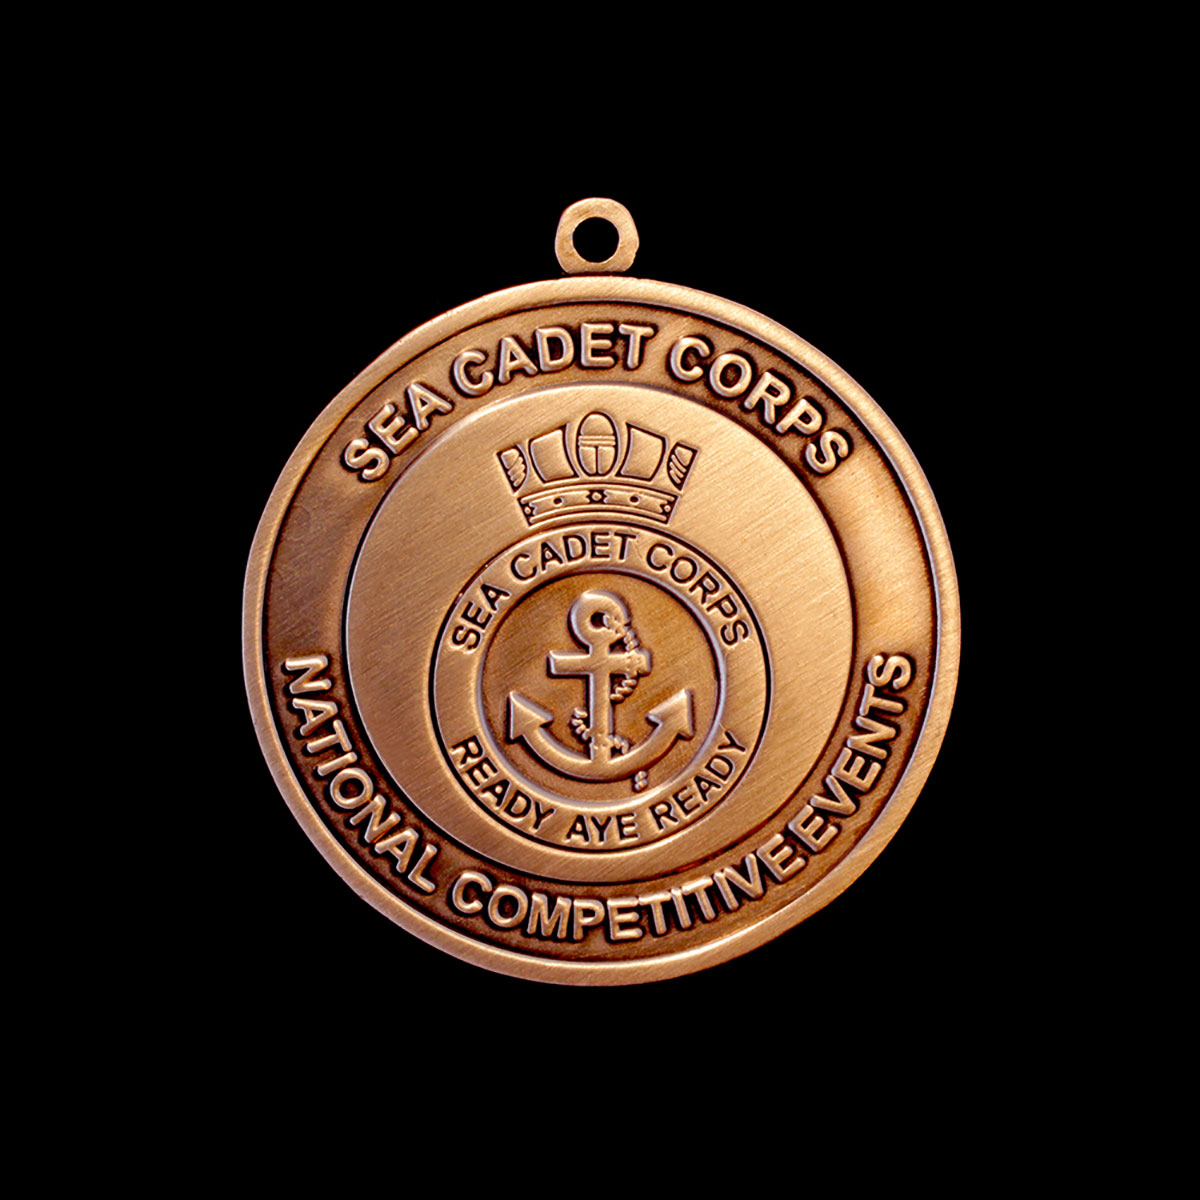 Bronze Sea Cadet Corp National Competitive Events Awards Medals Obverse